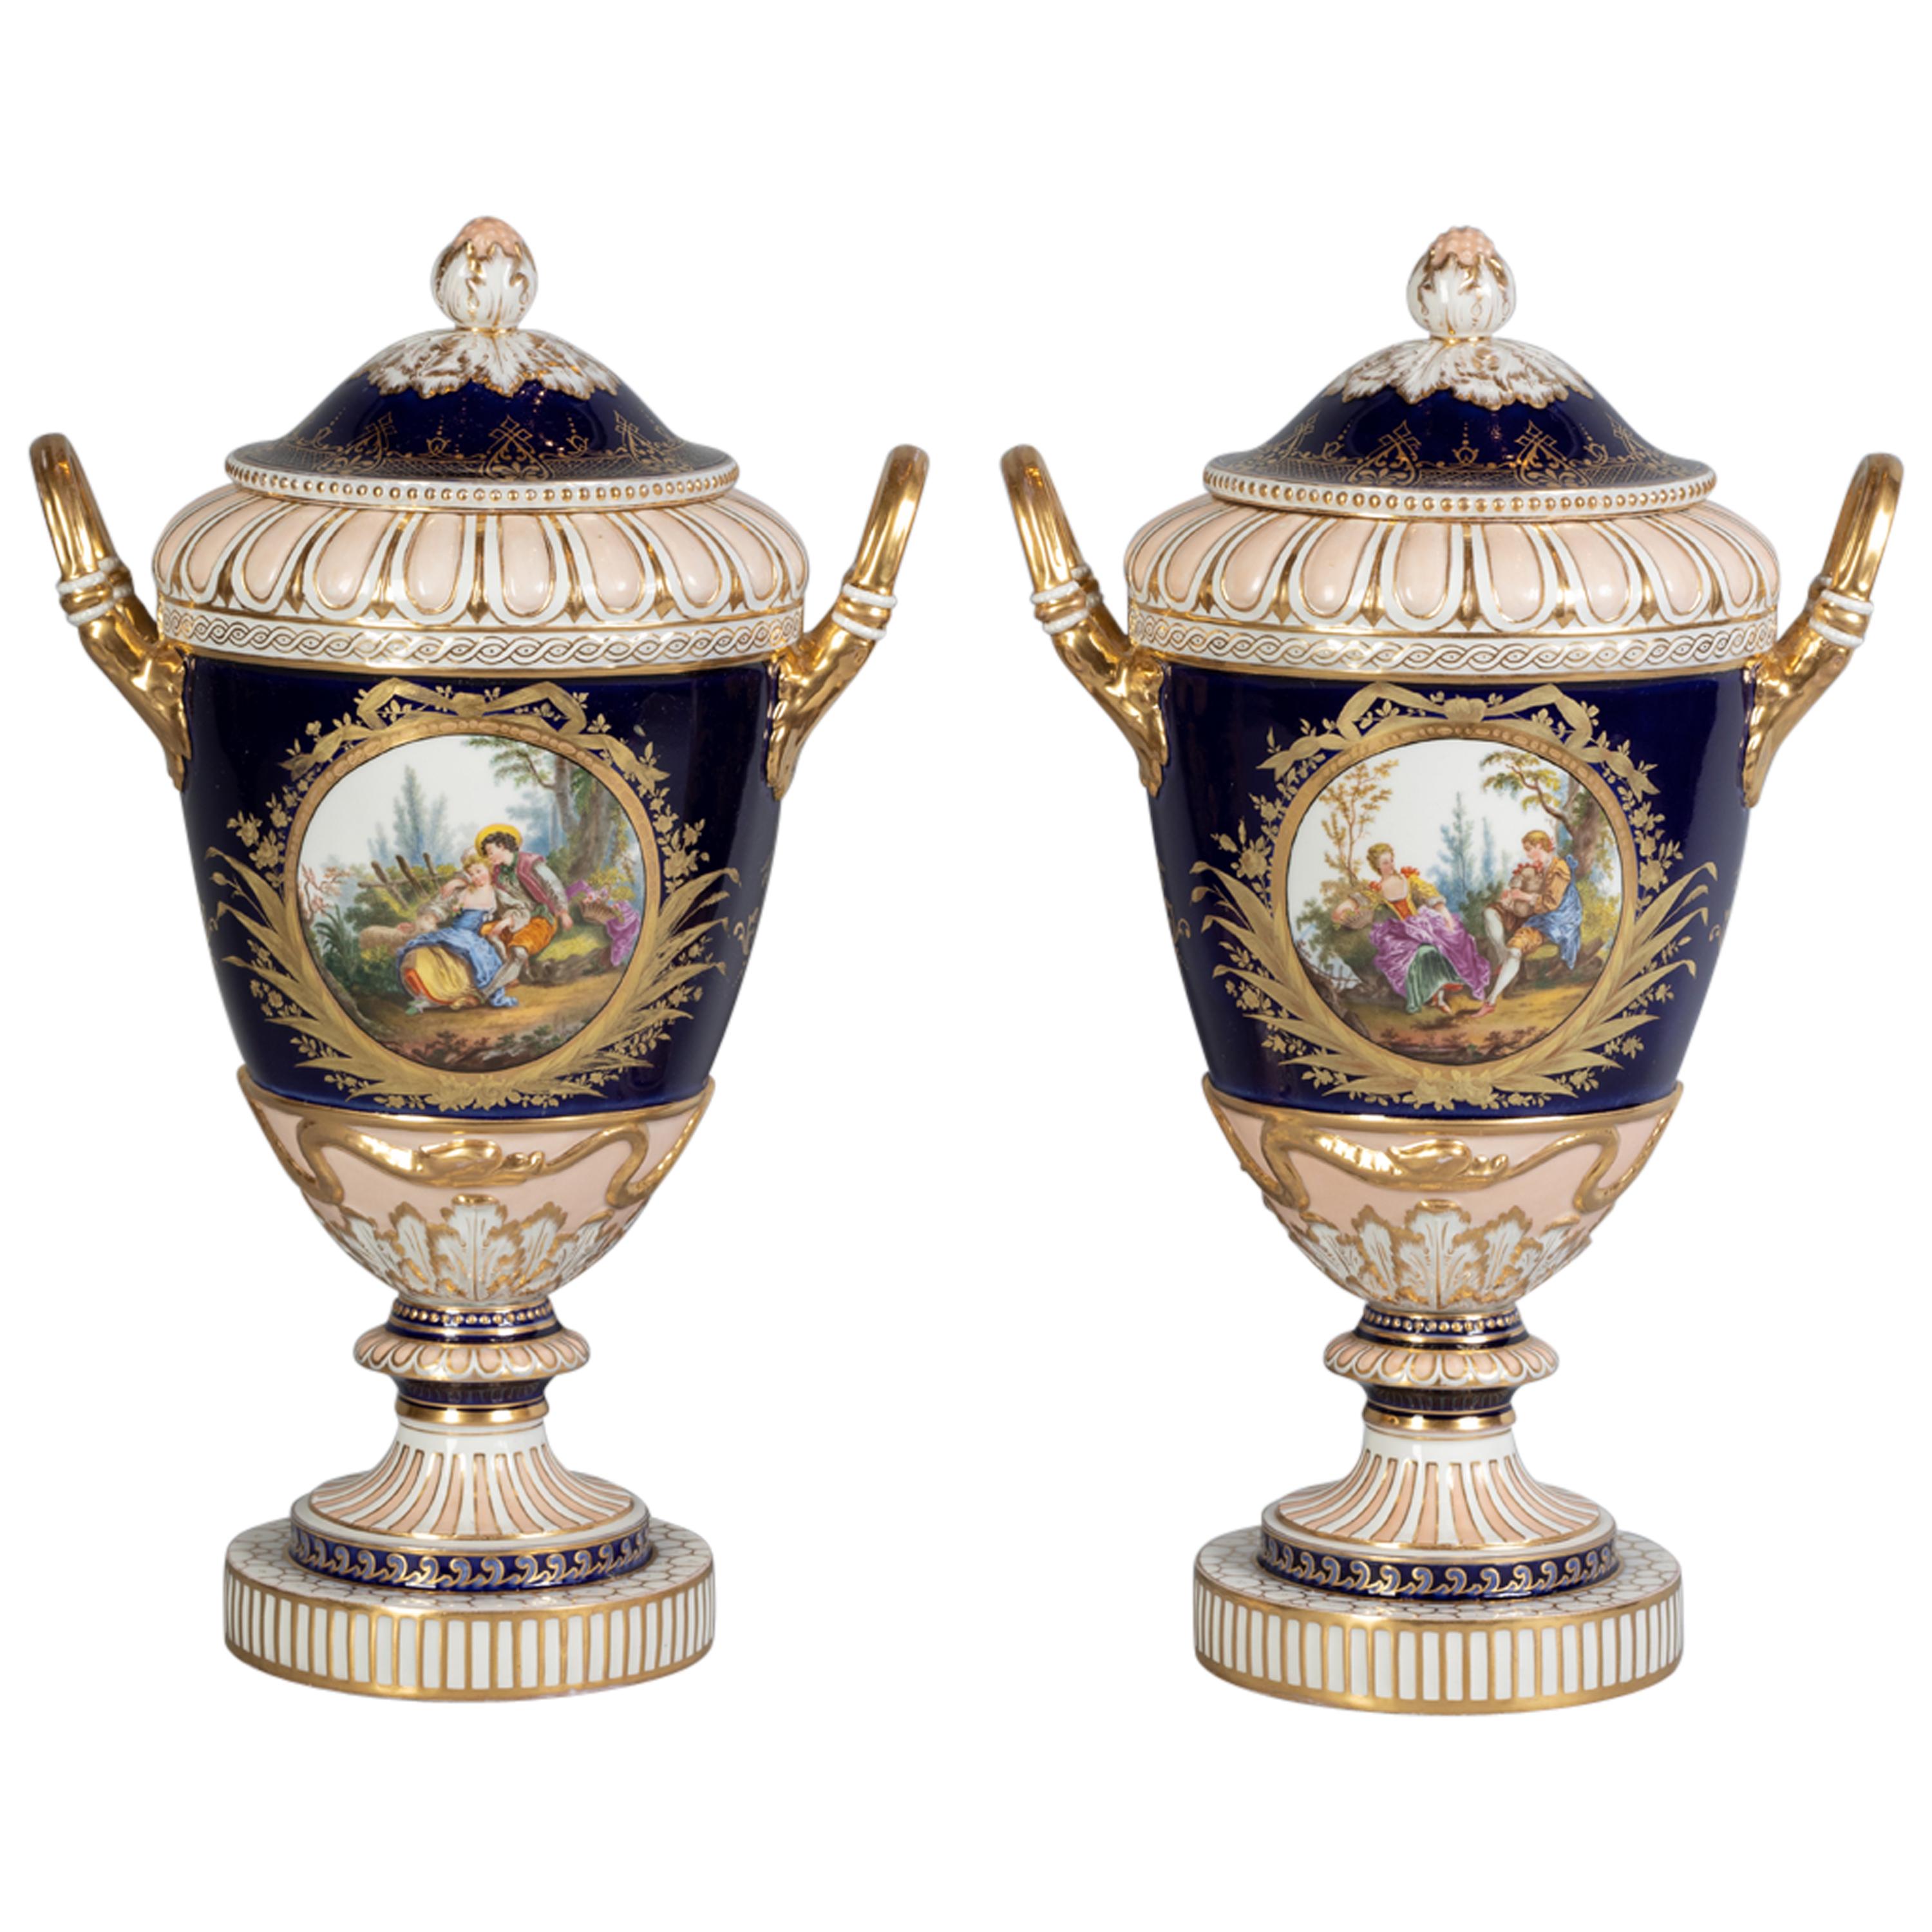 Pair of Berlin Porcelain Two-Handled Covered Urns, circa 1870